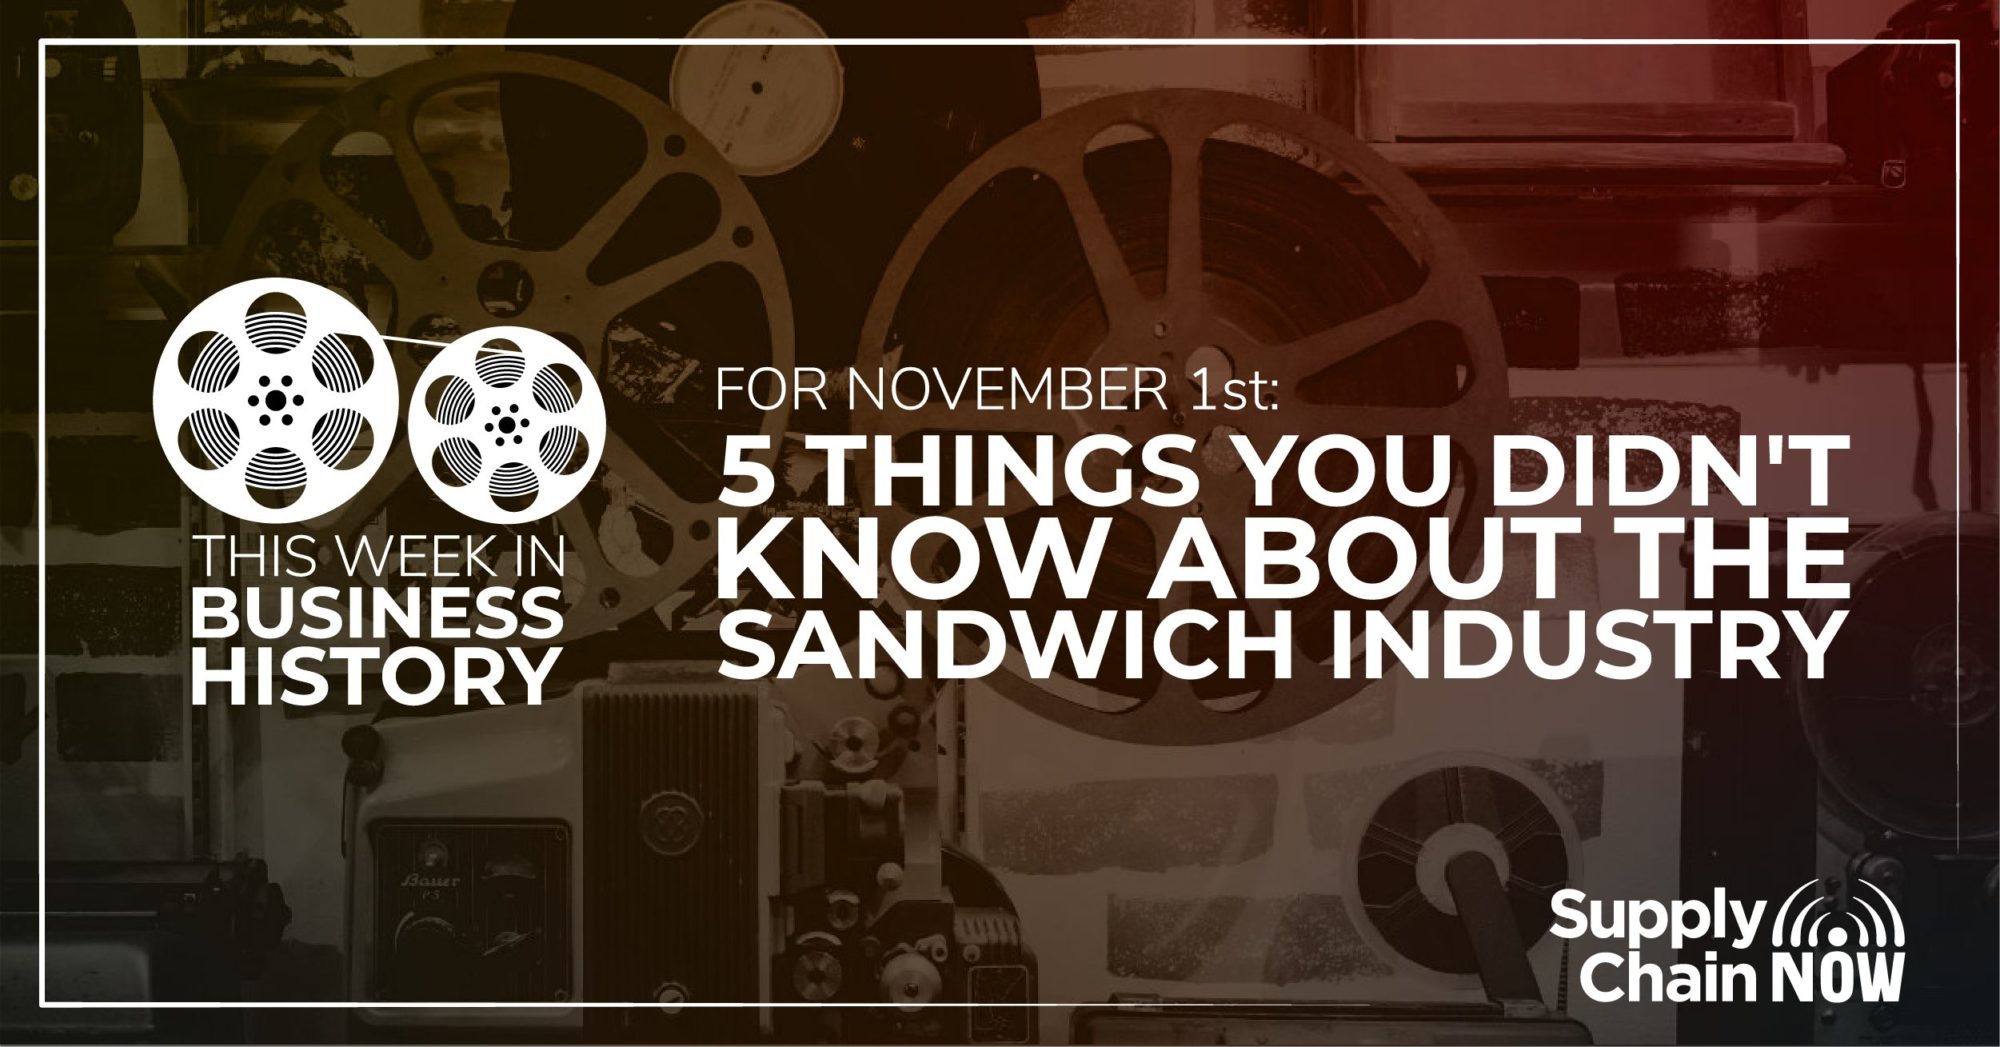 5 Things You Didn't Know About the Sandwich Industry